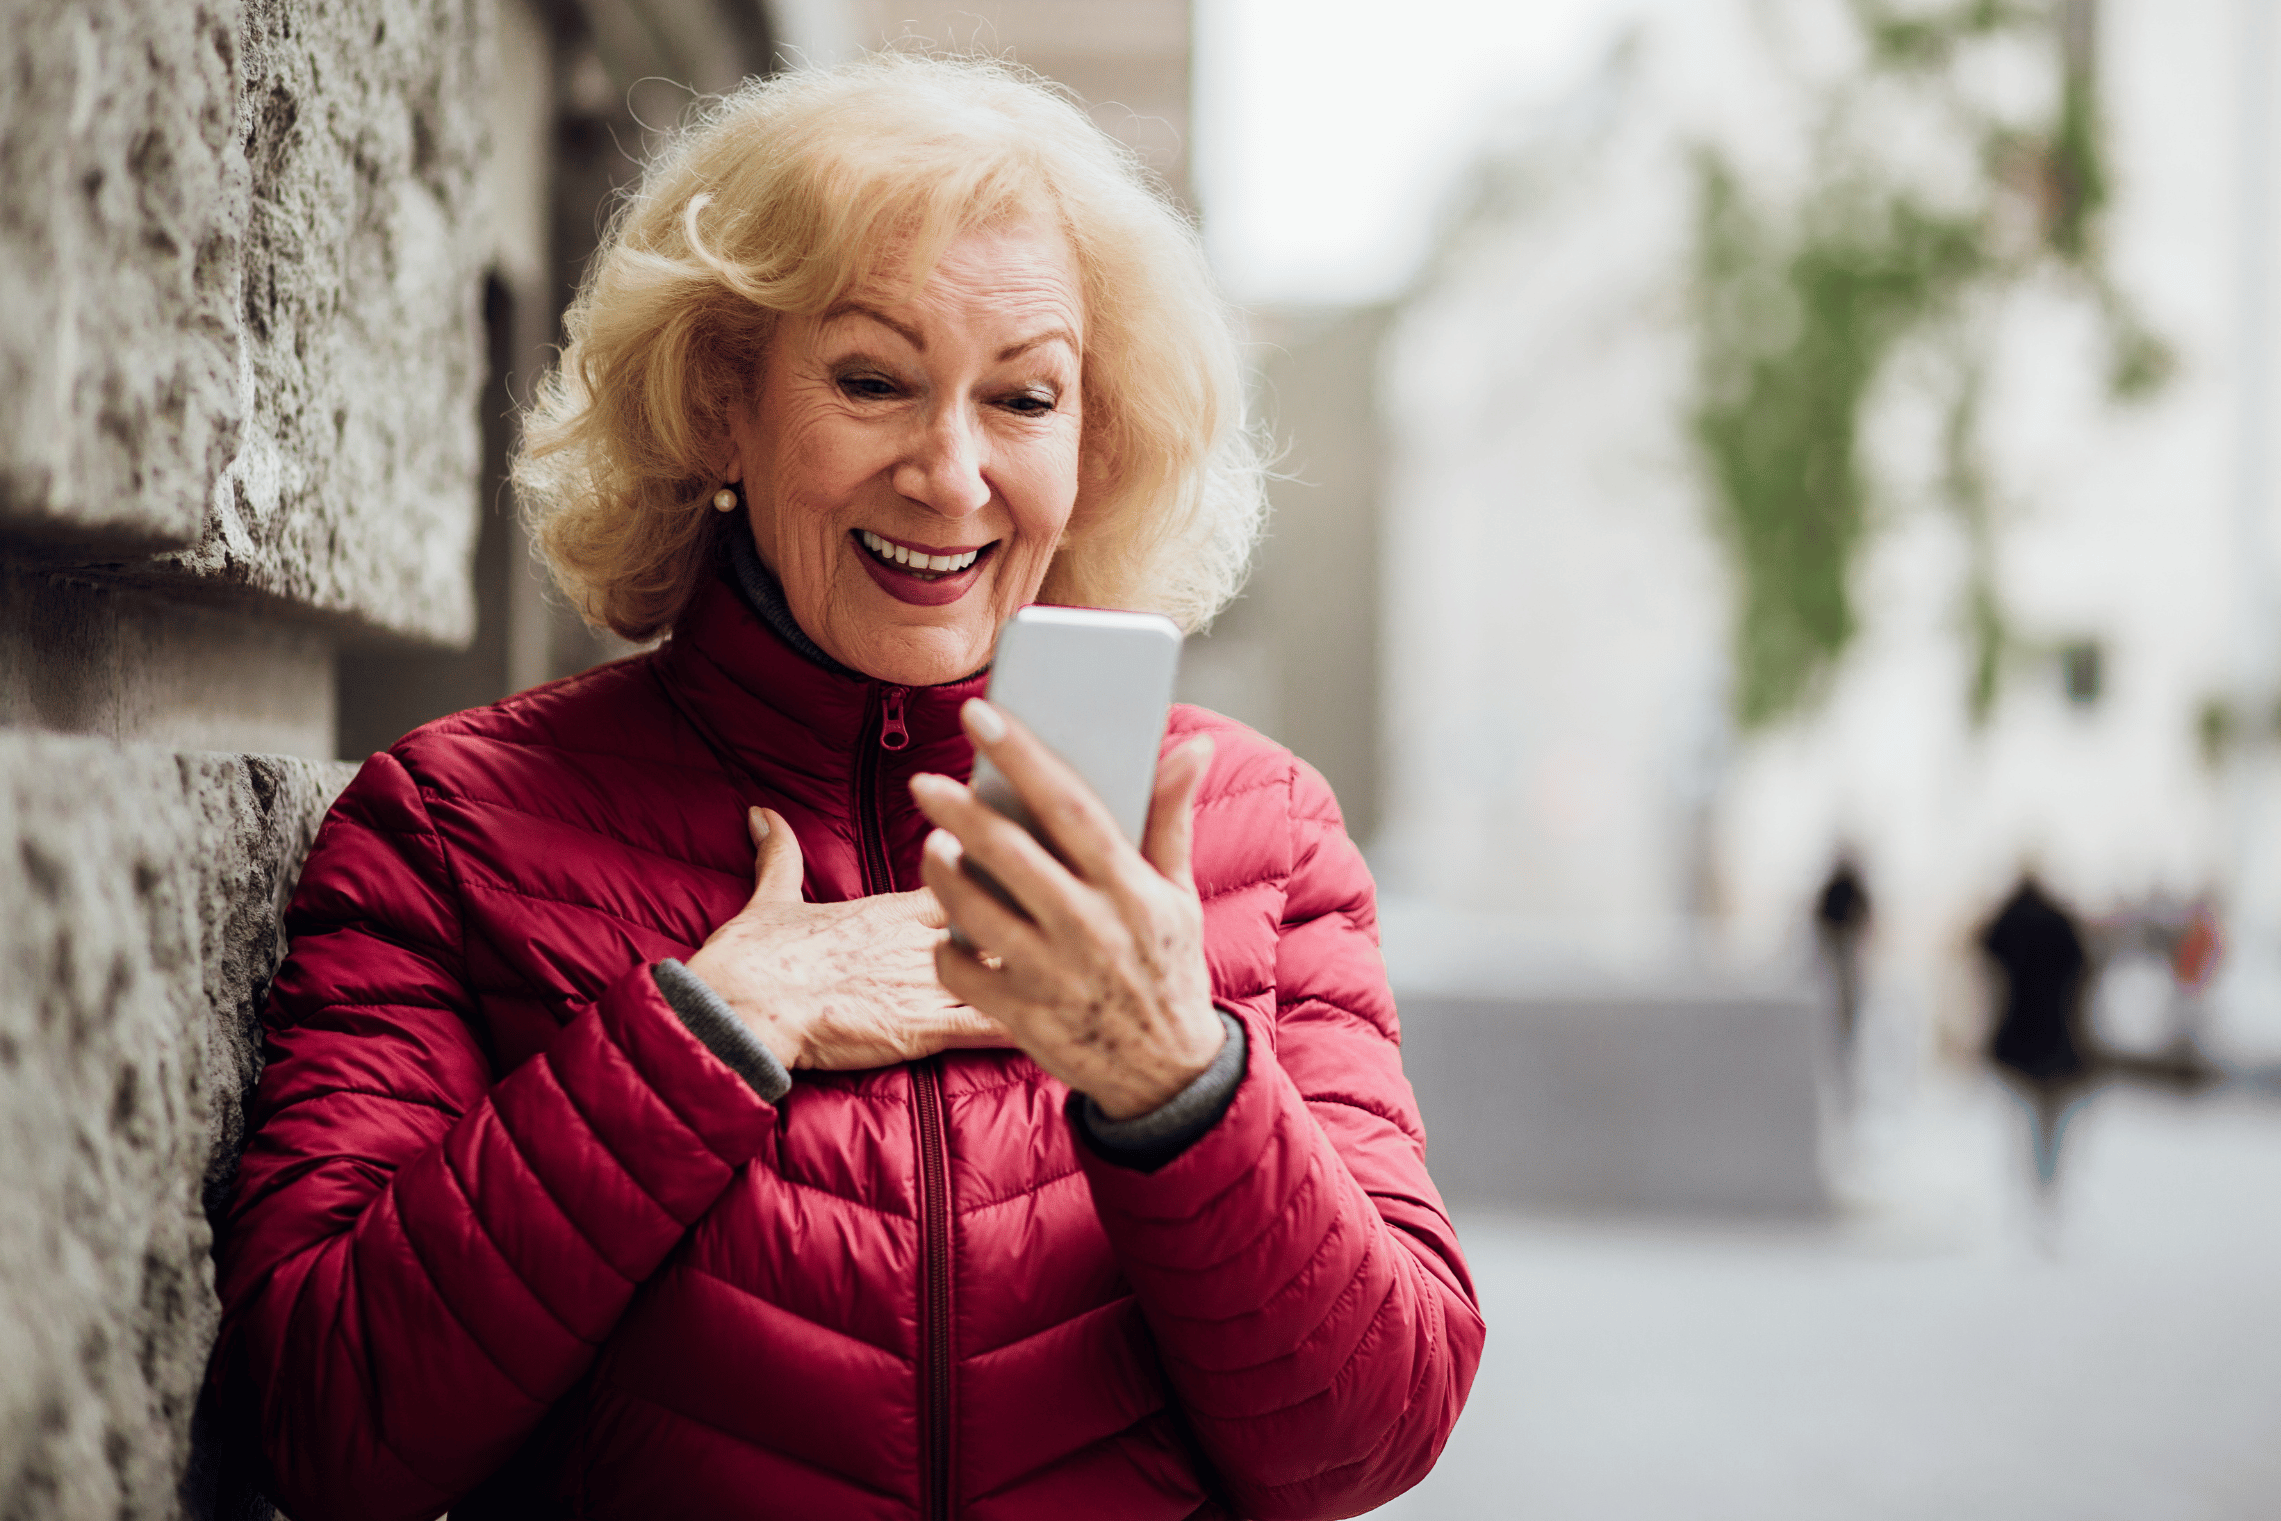 An image of an older woman surprised at her phone